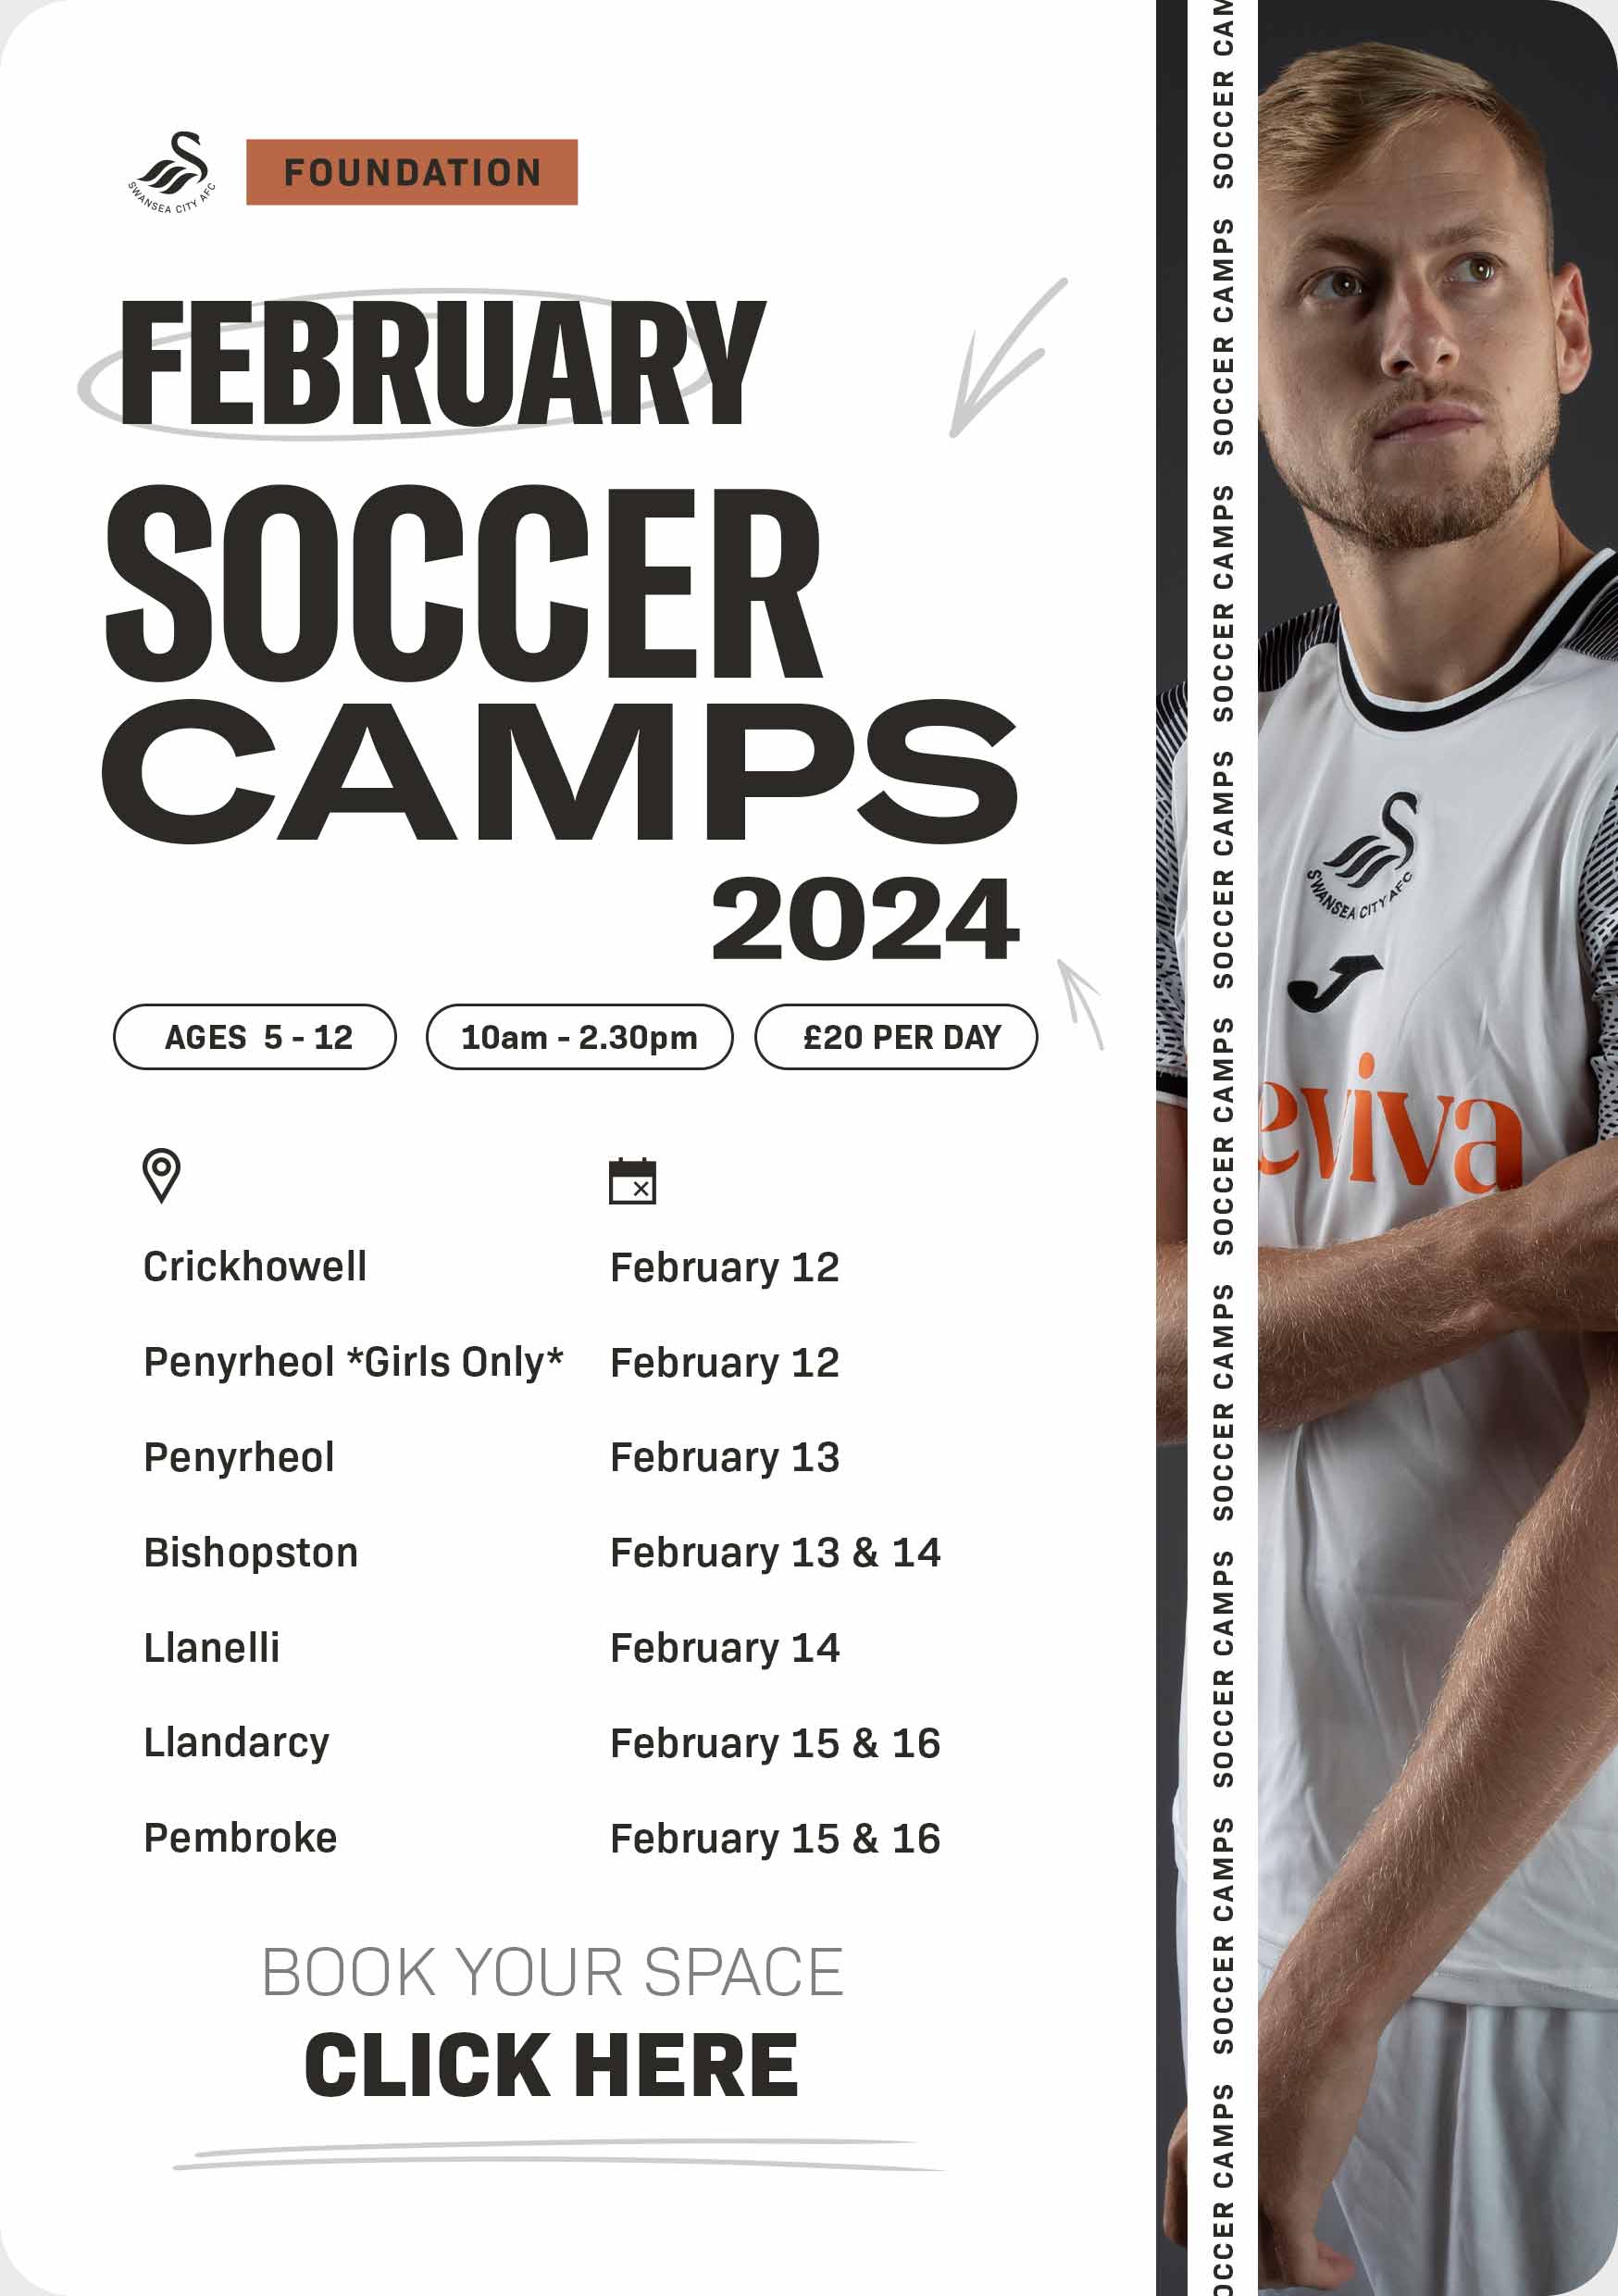 Swansea City Foundation February Soccer Camps Advert